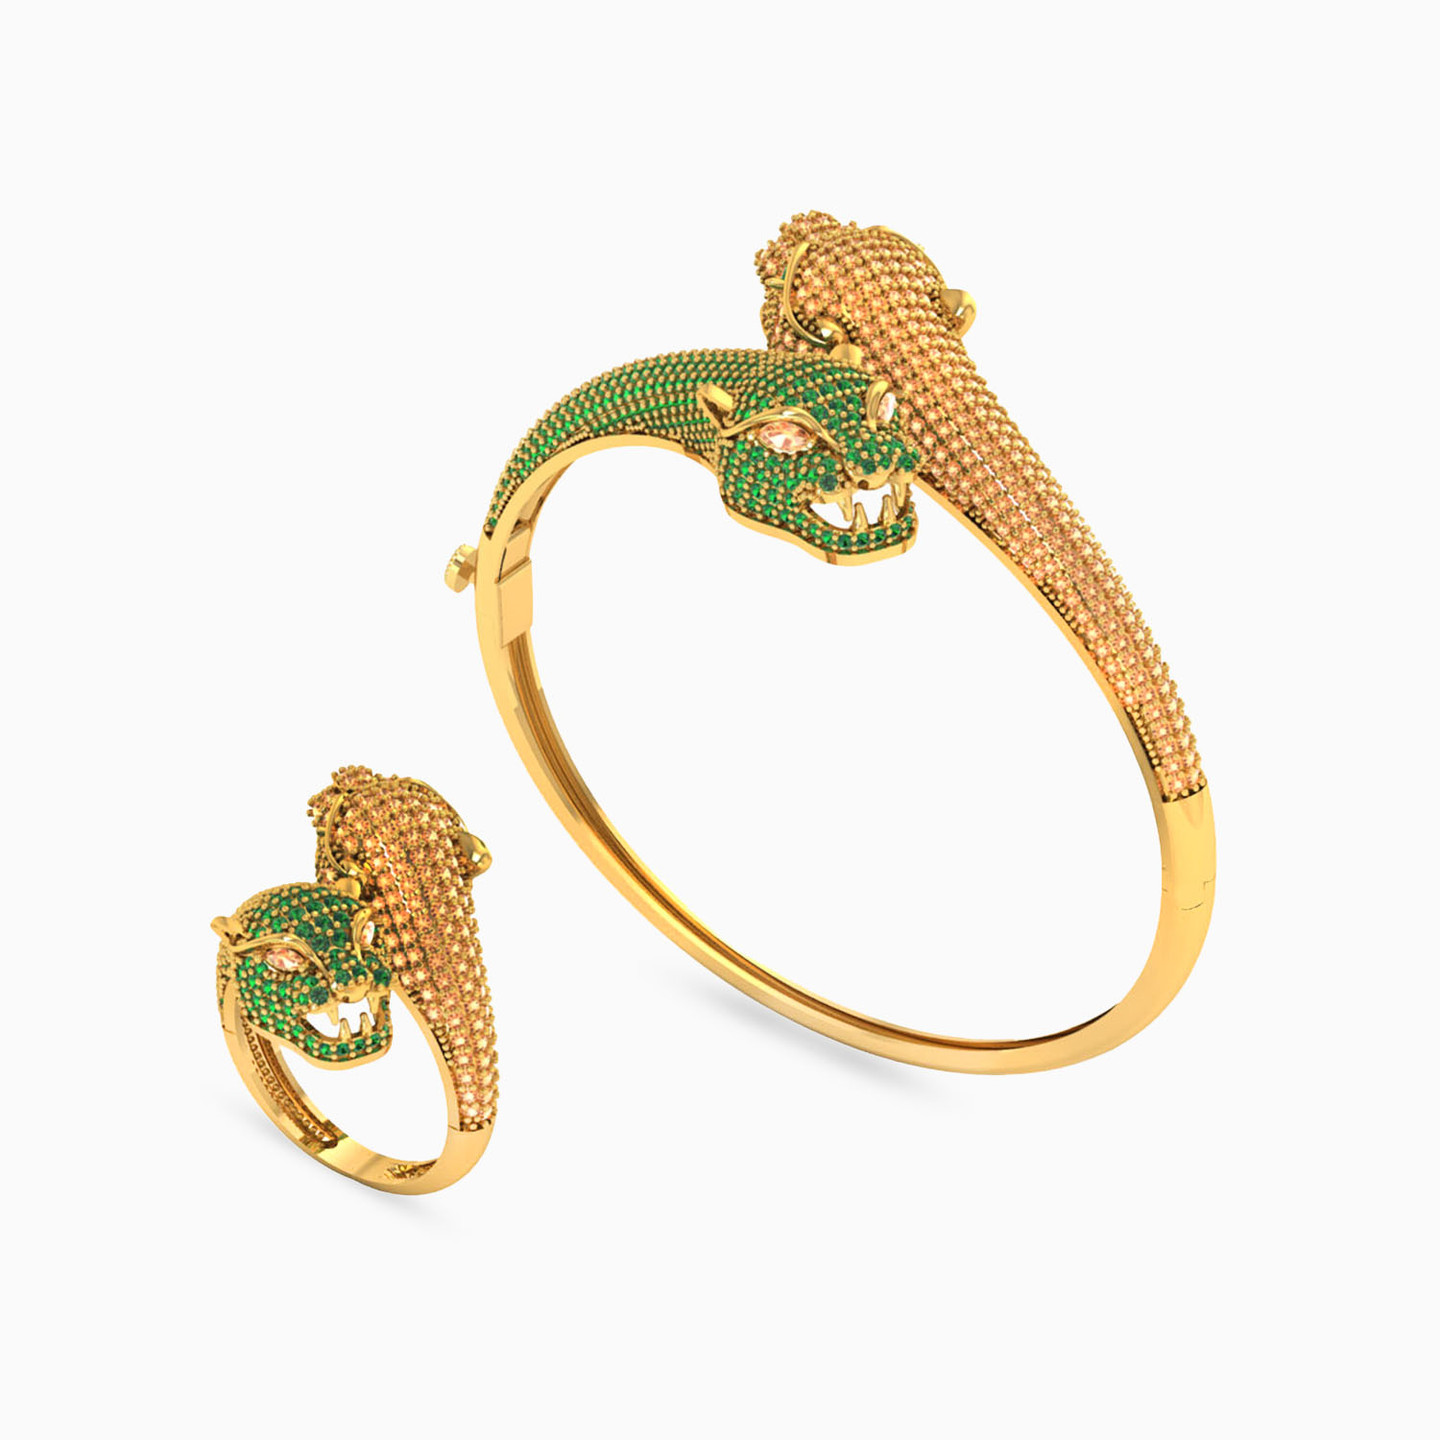 18K Gold Colored Stones Bangle & Ring Jewelry Set - 2 Pieces